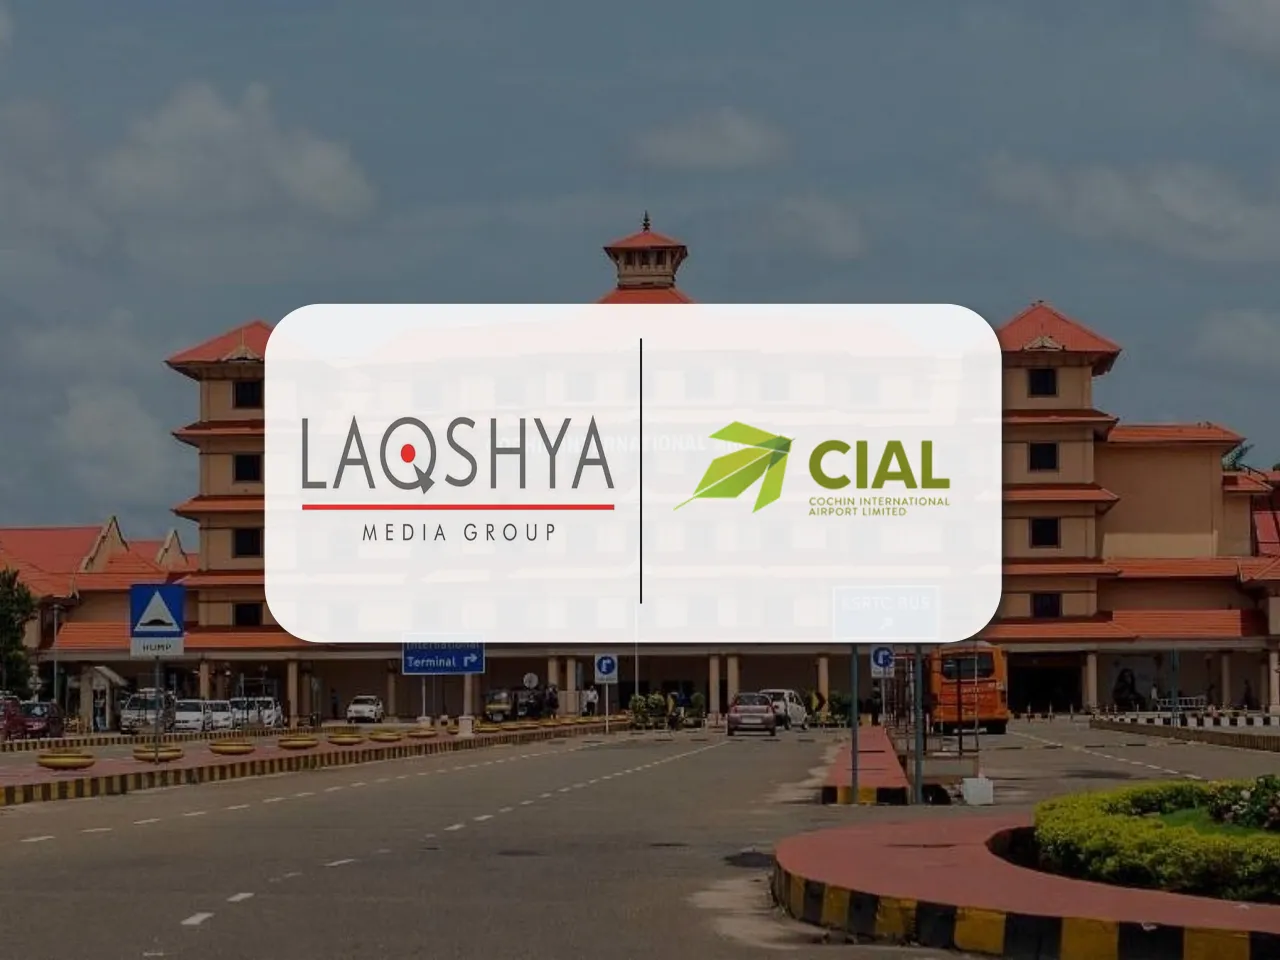 Laqshya Media Group acquires advertising rights for Cochin International Airport